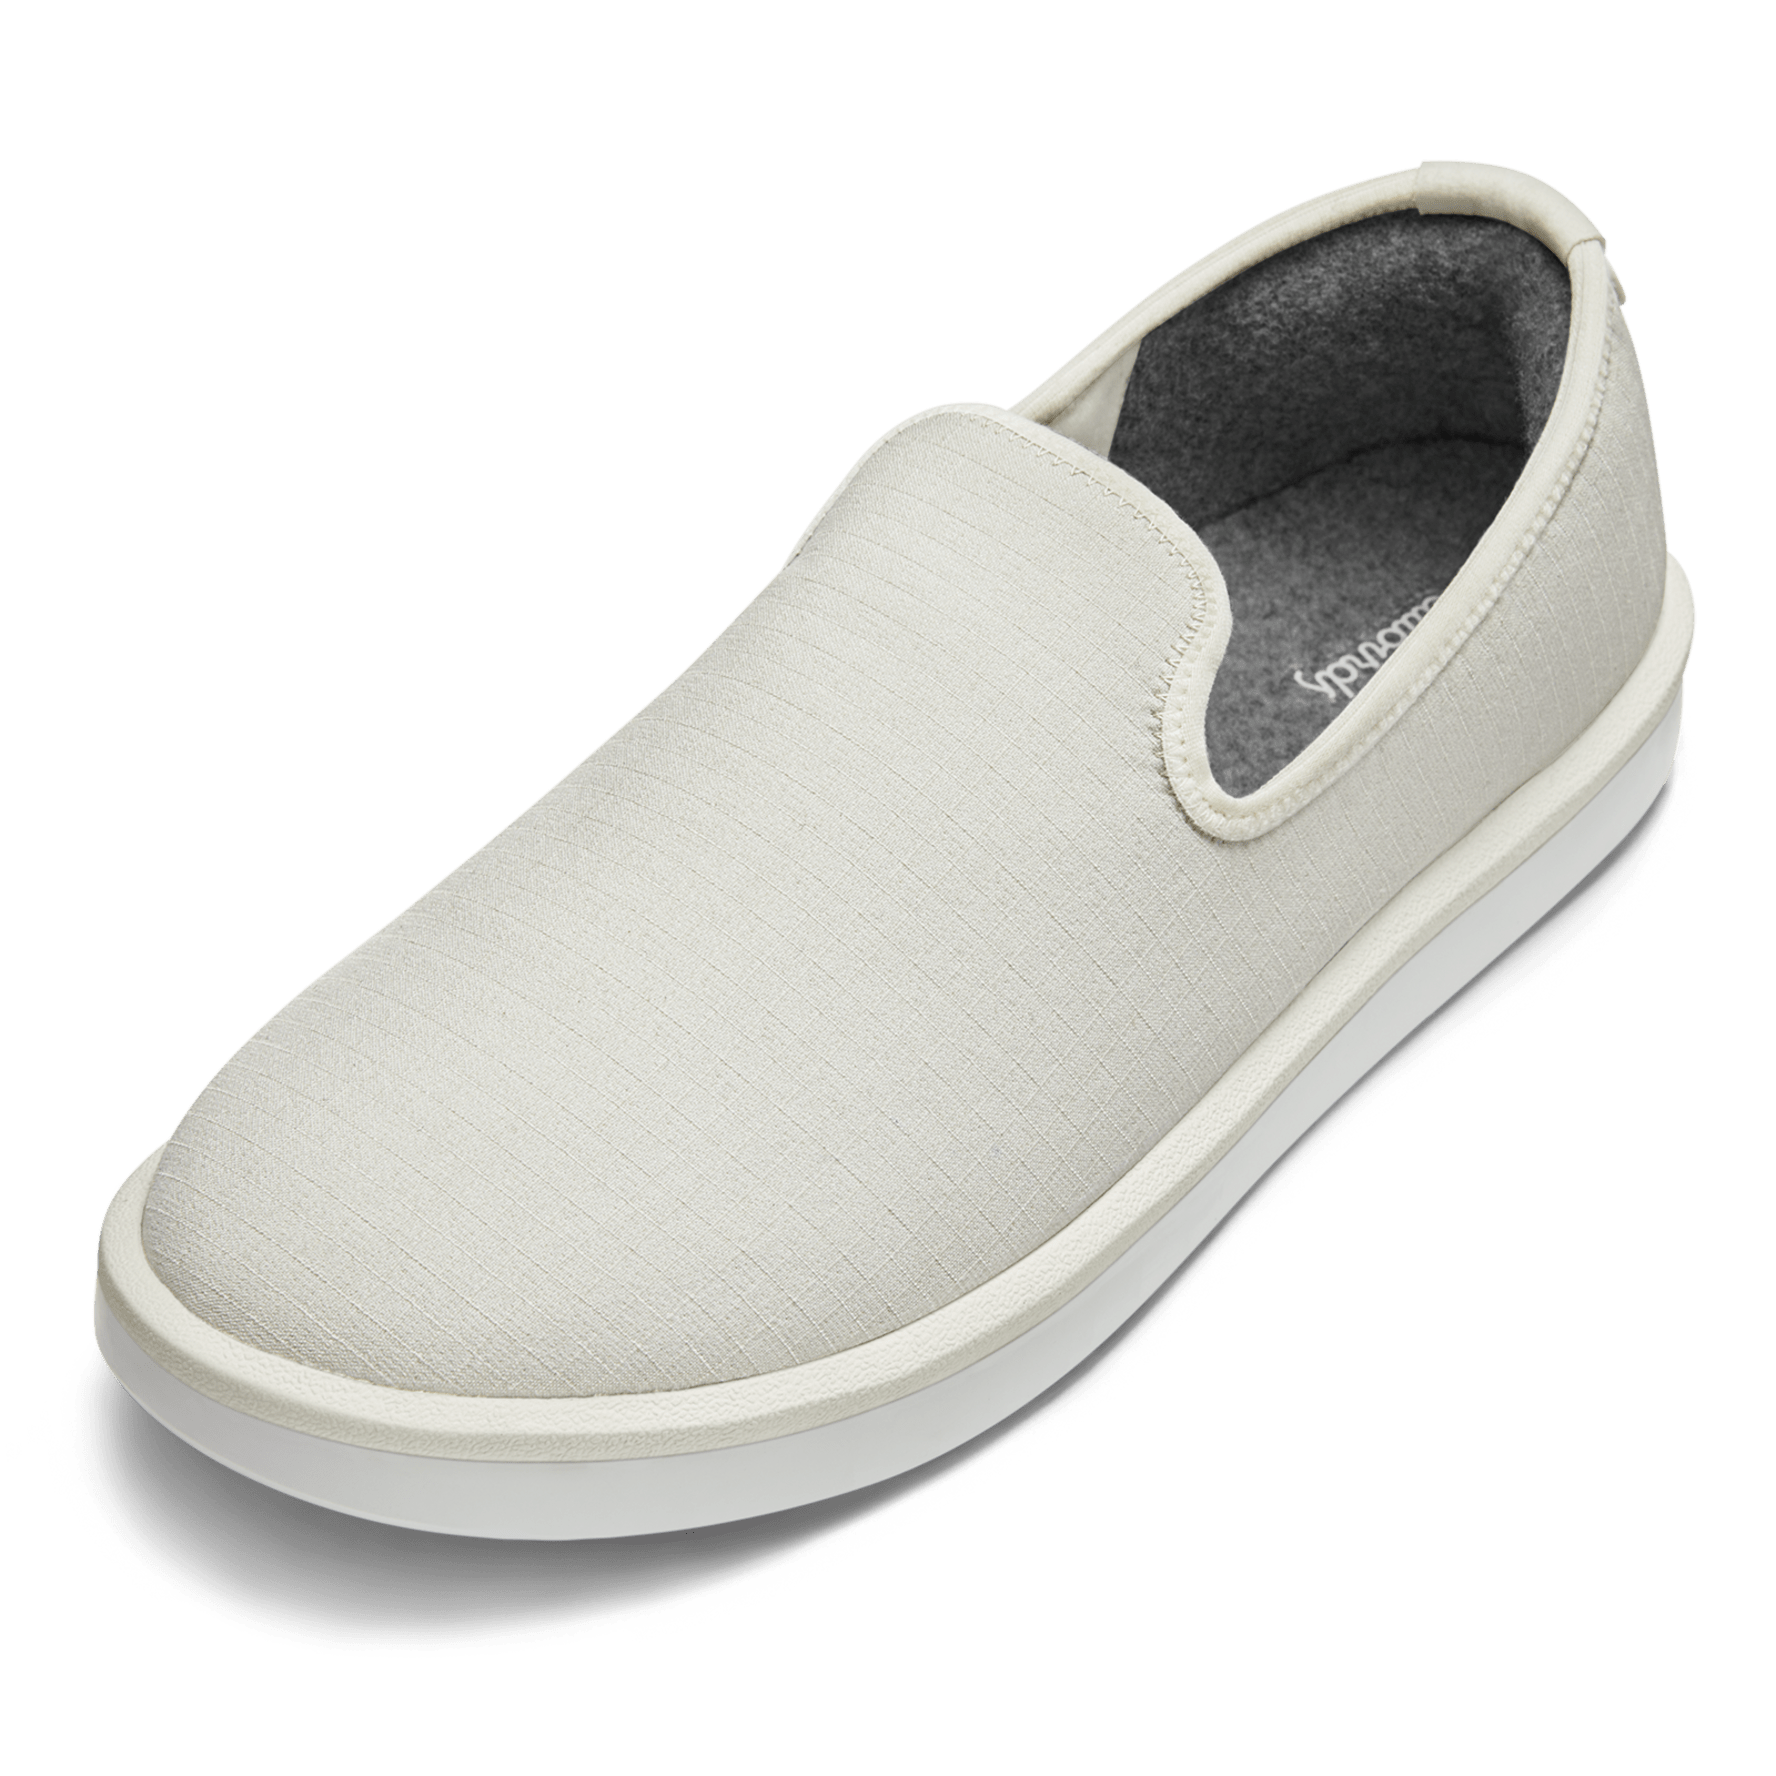 Men's Wool Lounger Woven - Natural White (Blizzard Sole)